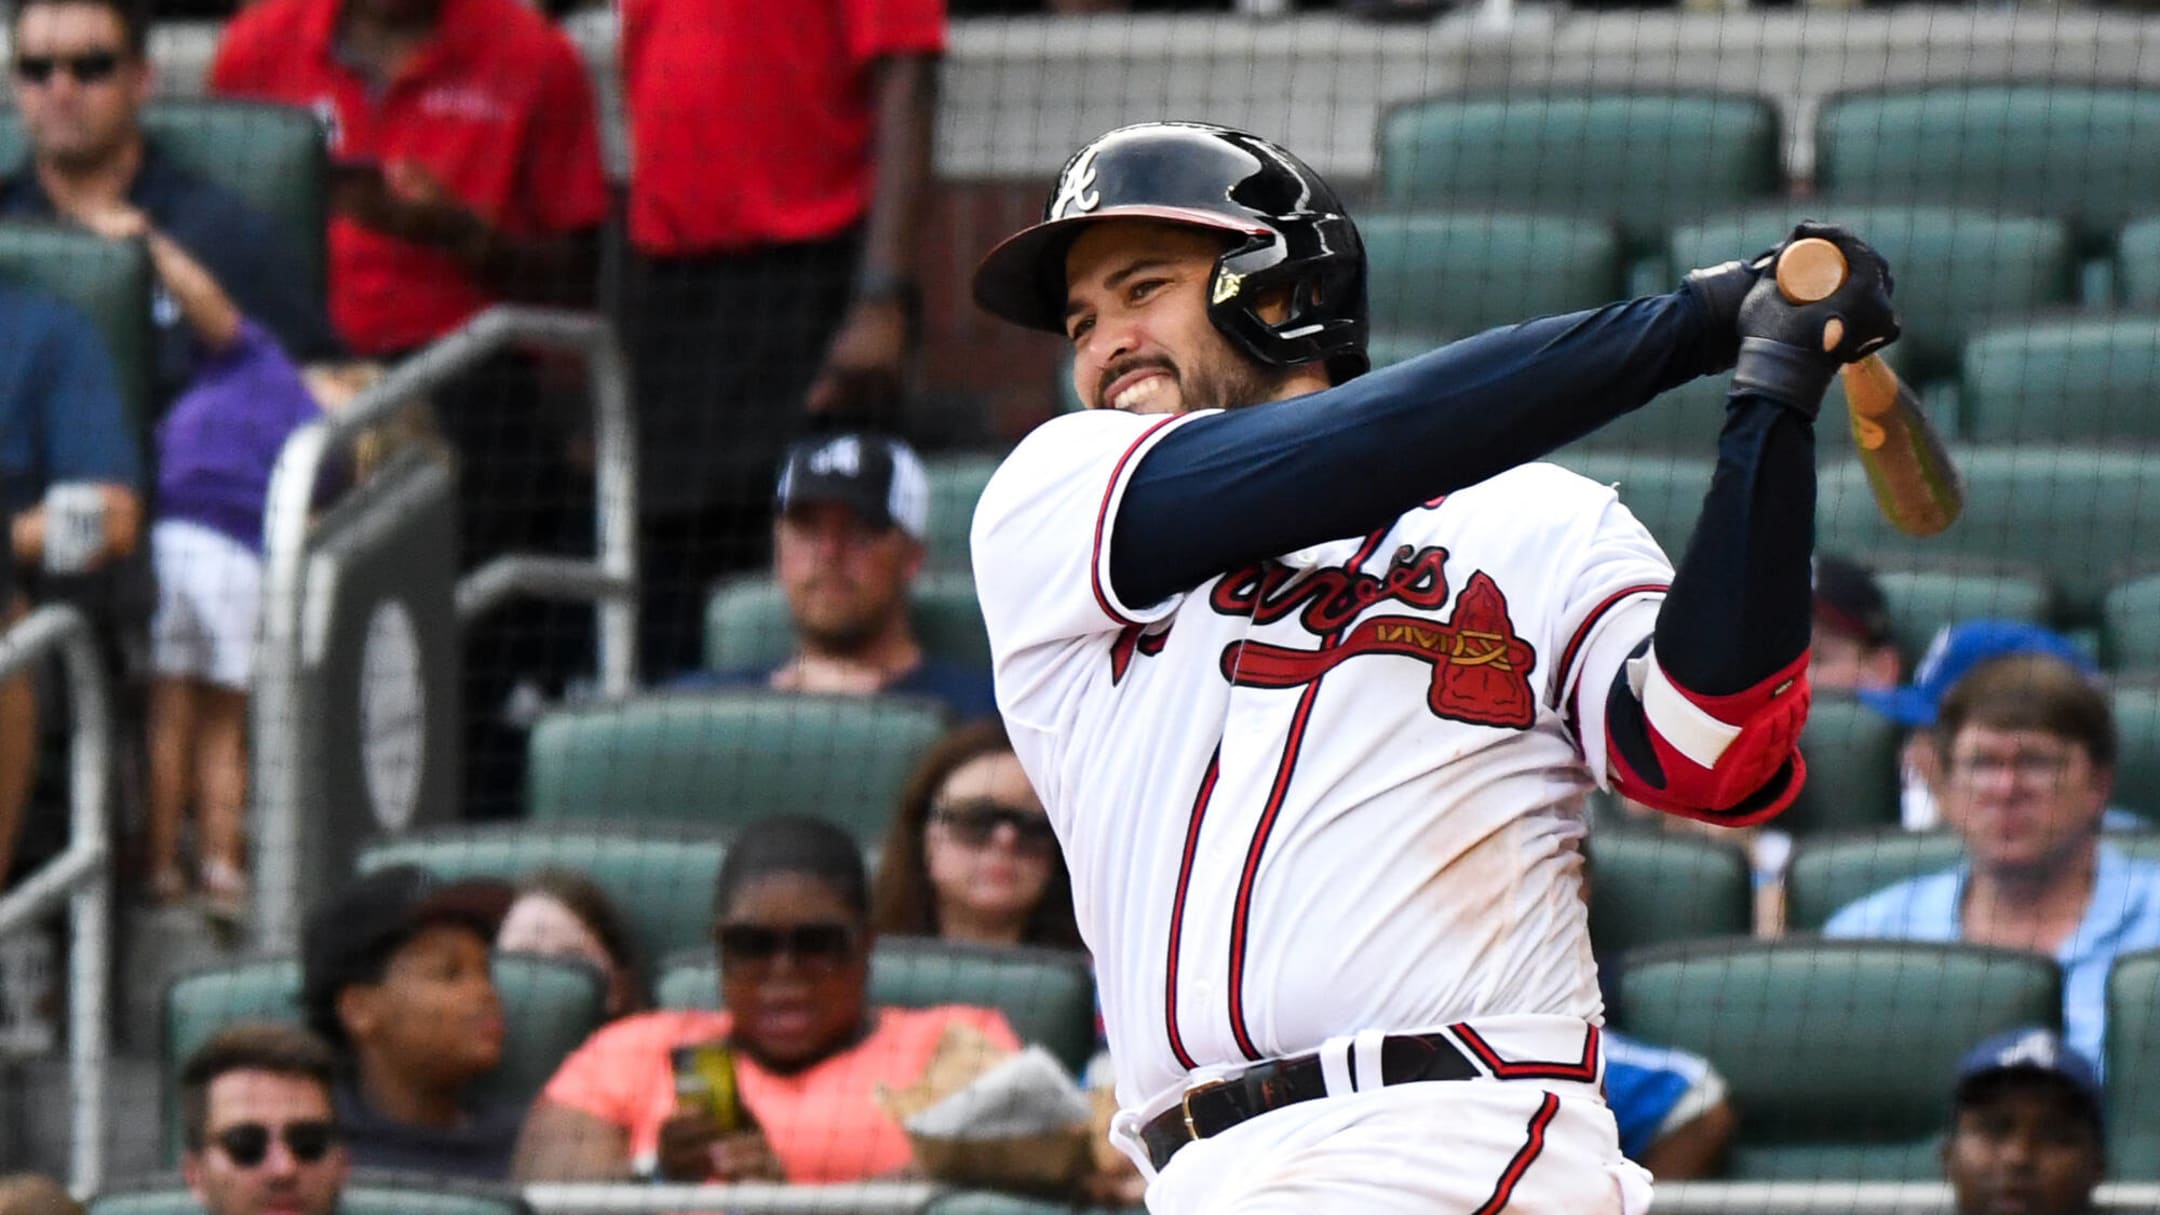 Predicting the 2023 stats of each Braves player — Travis d'Arnaud